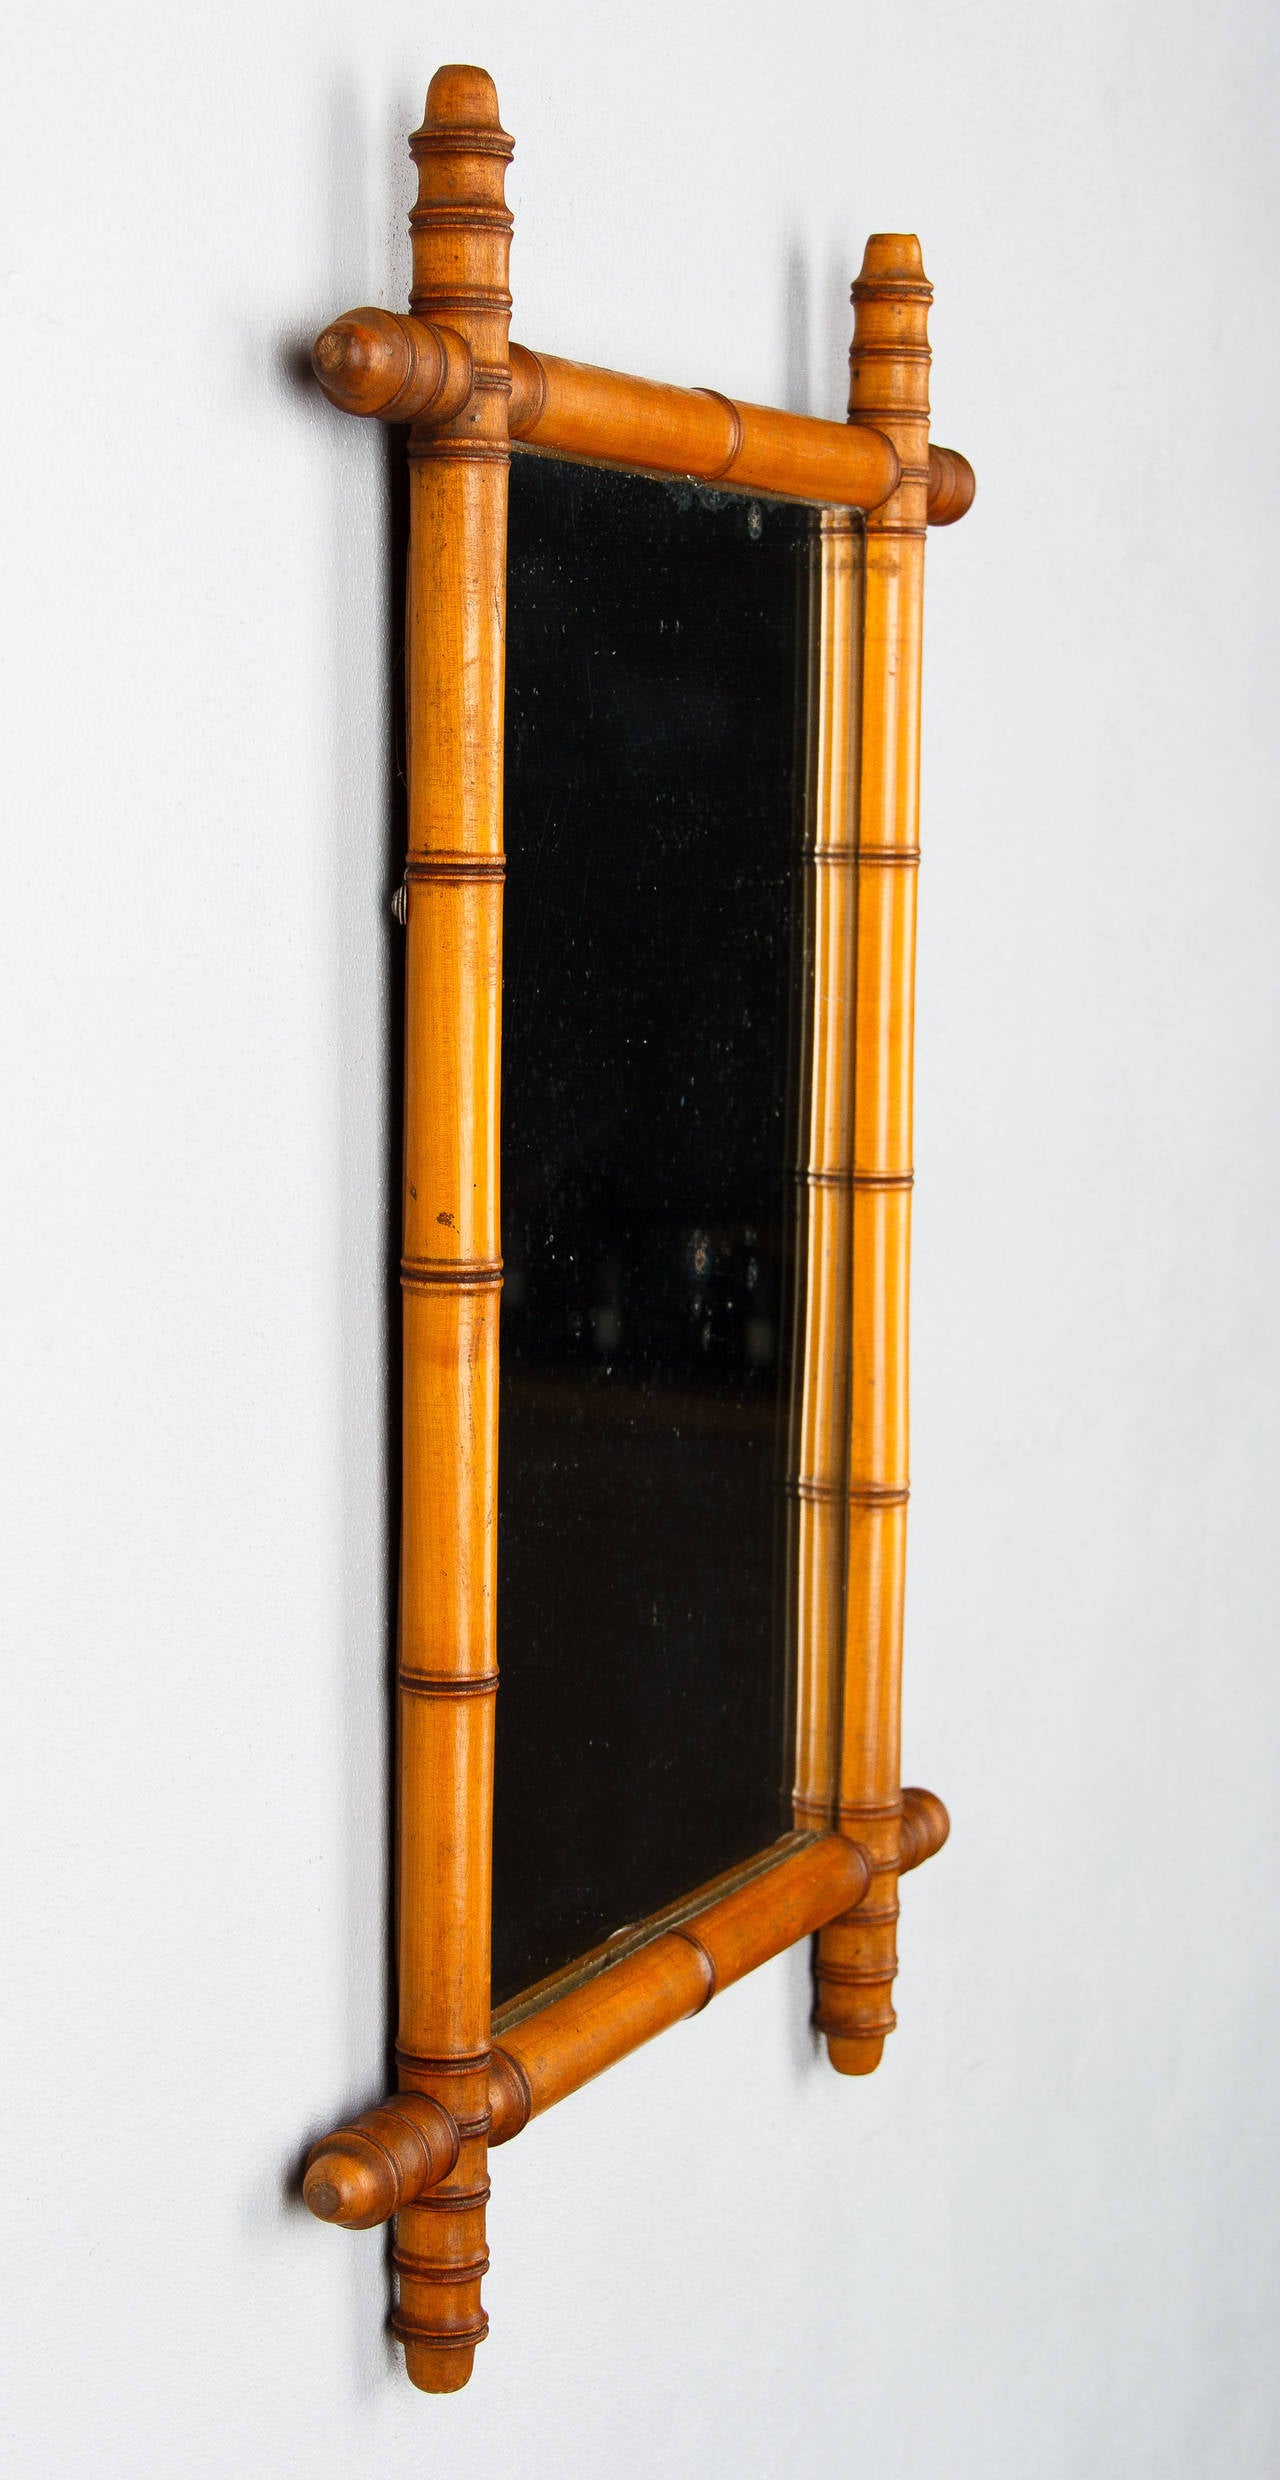 An early 1900s French Colonial style Mirror with a faux-bamboo frame made of beech wood.